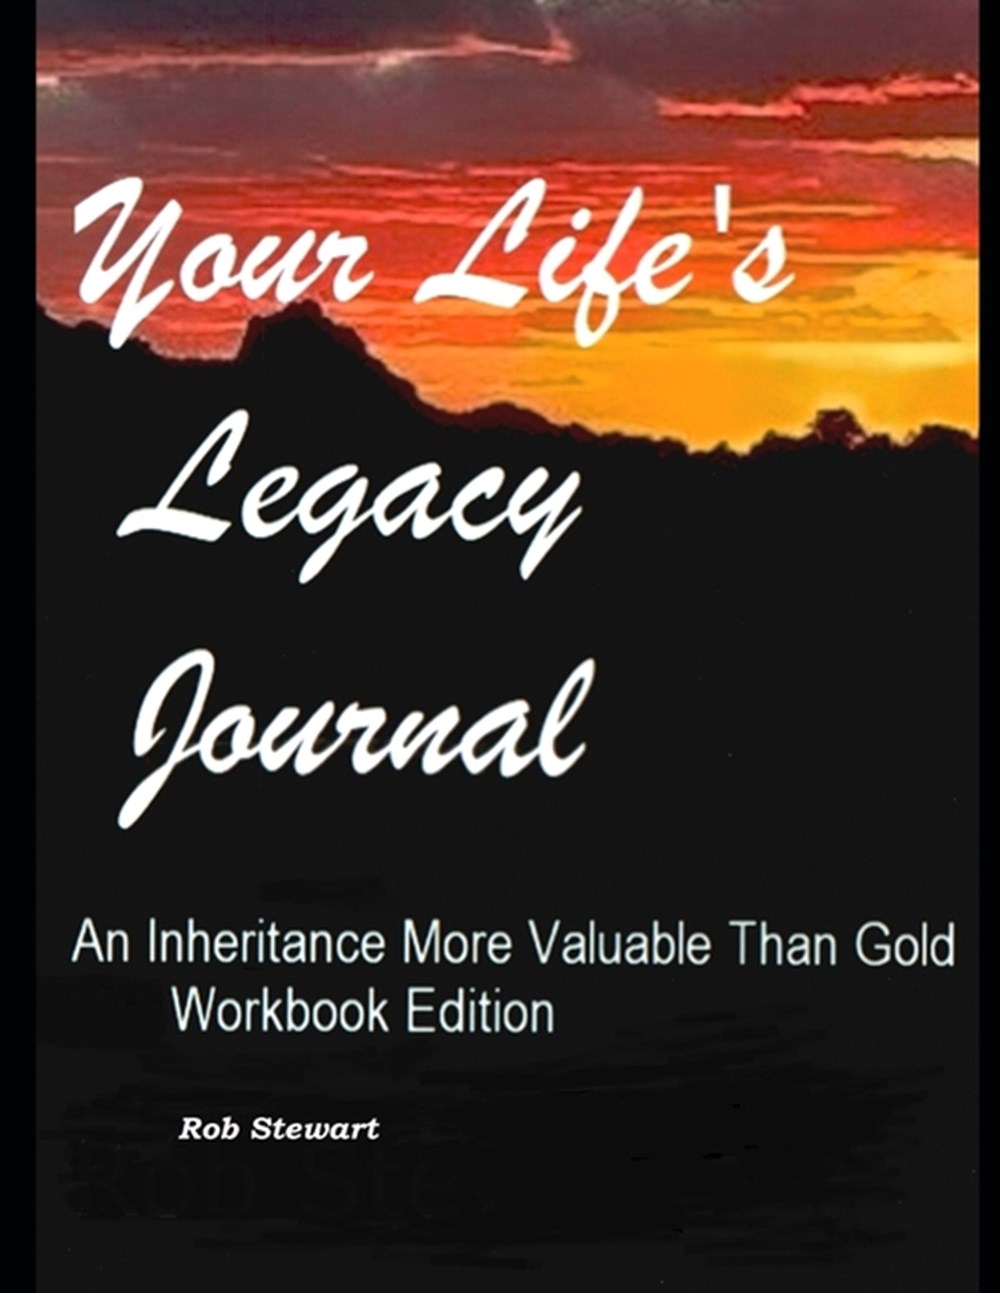 Your Life's Legacy Journal An Inheritance More Valuable Than Gold. Workbook Edition